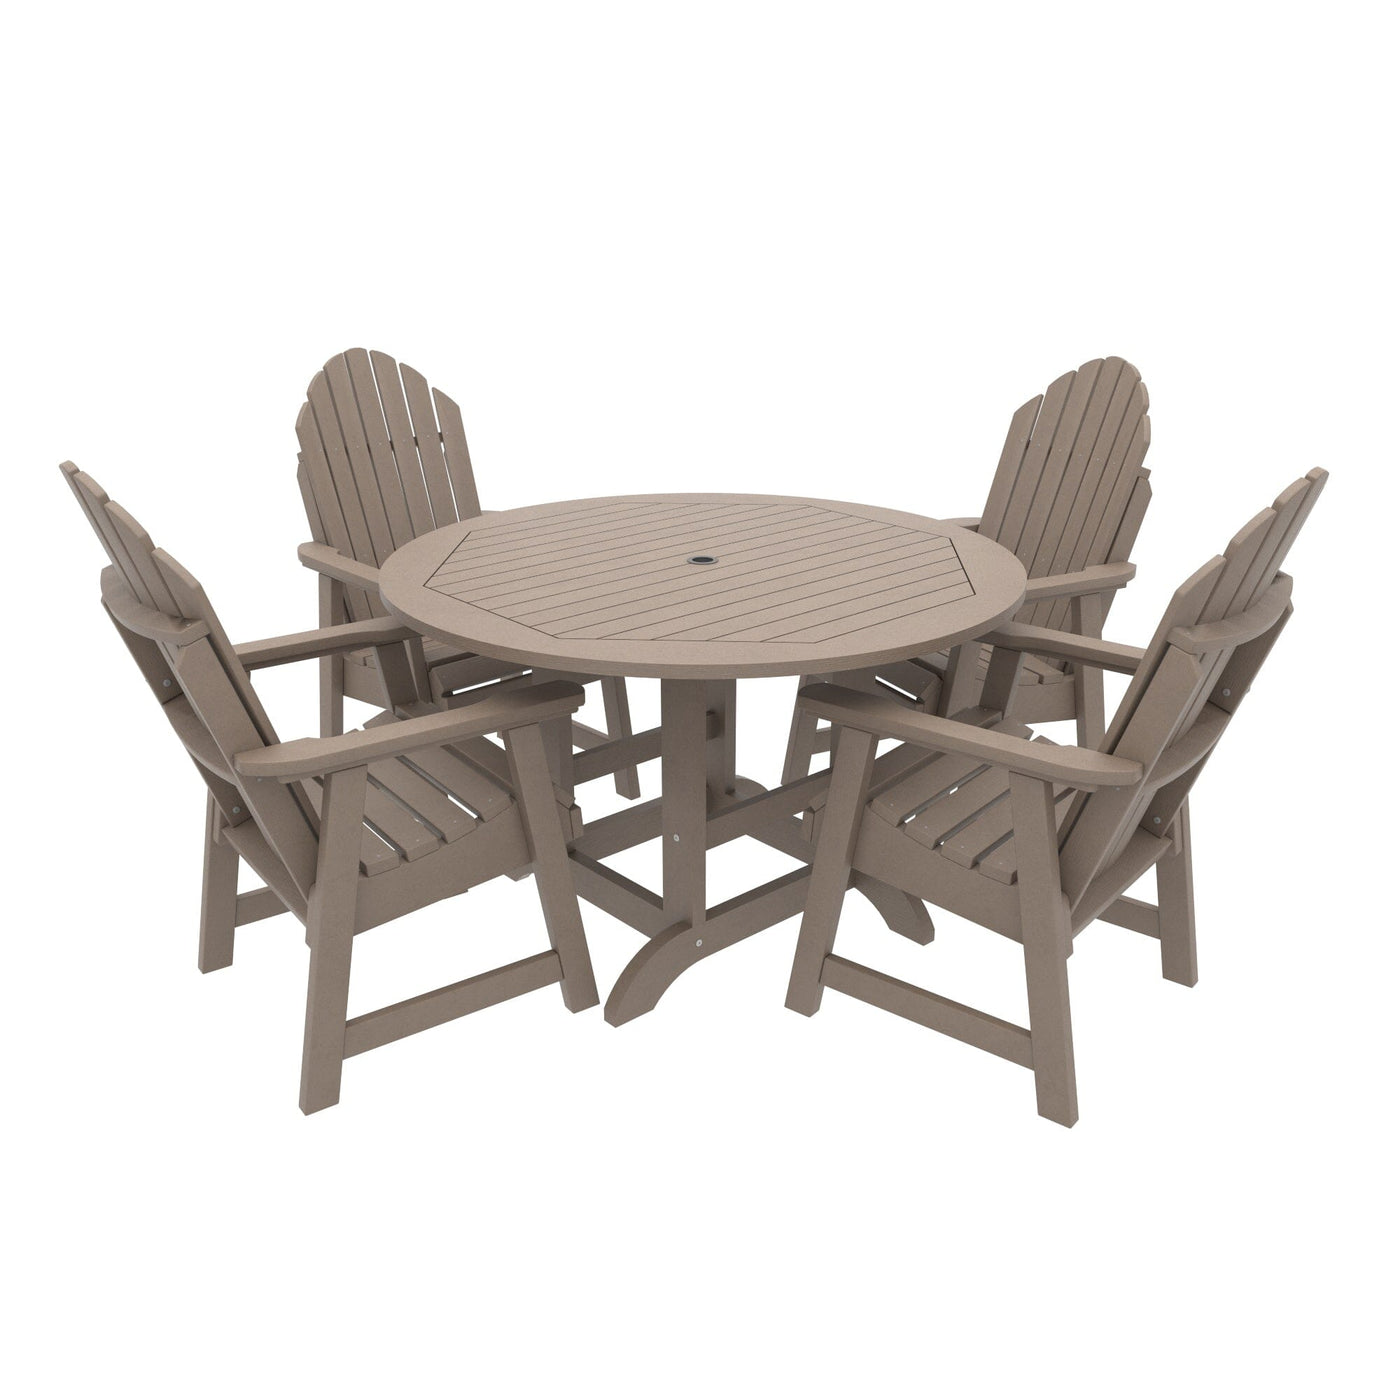 Commercial Grade 5 Pc Muskoka Adirondack Dining Set with 48” Table Kitted Sets Sequoia Professional Woodland Brown 